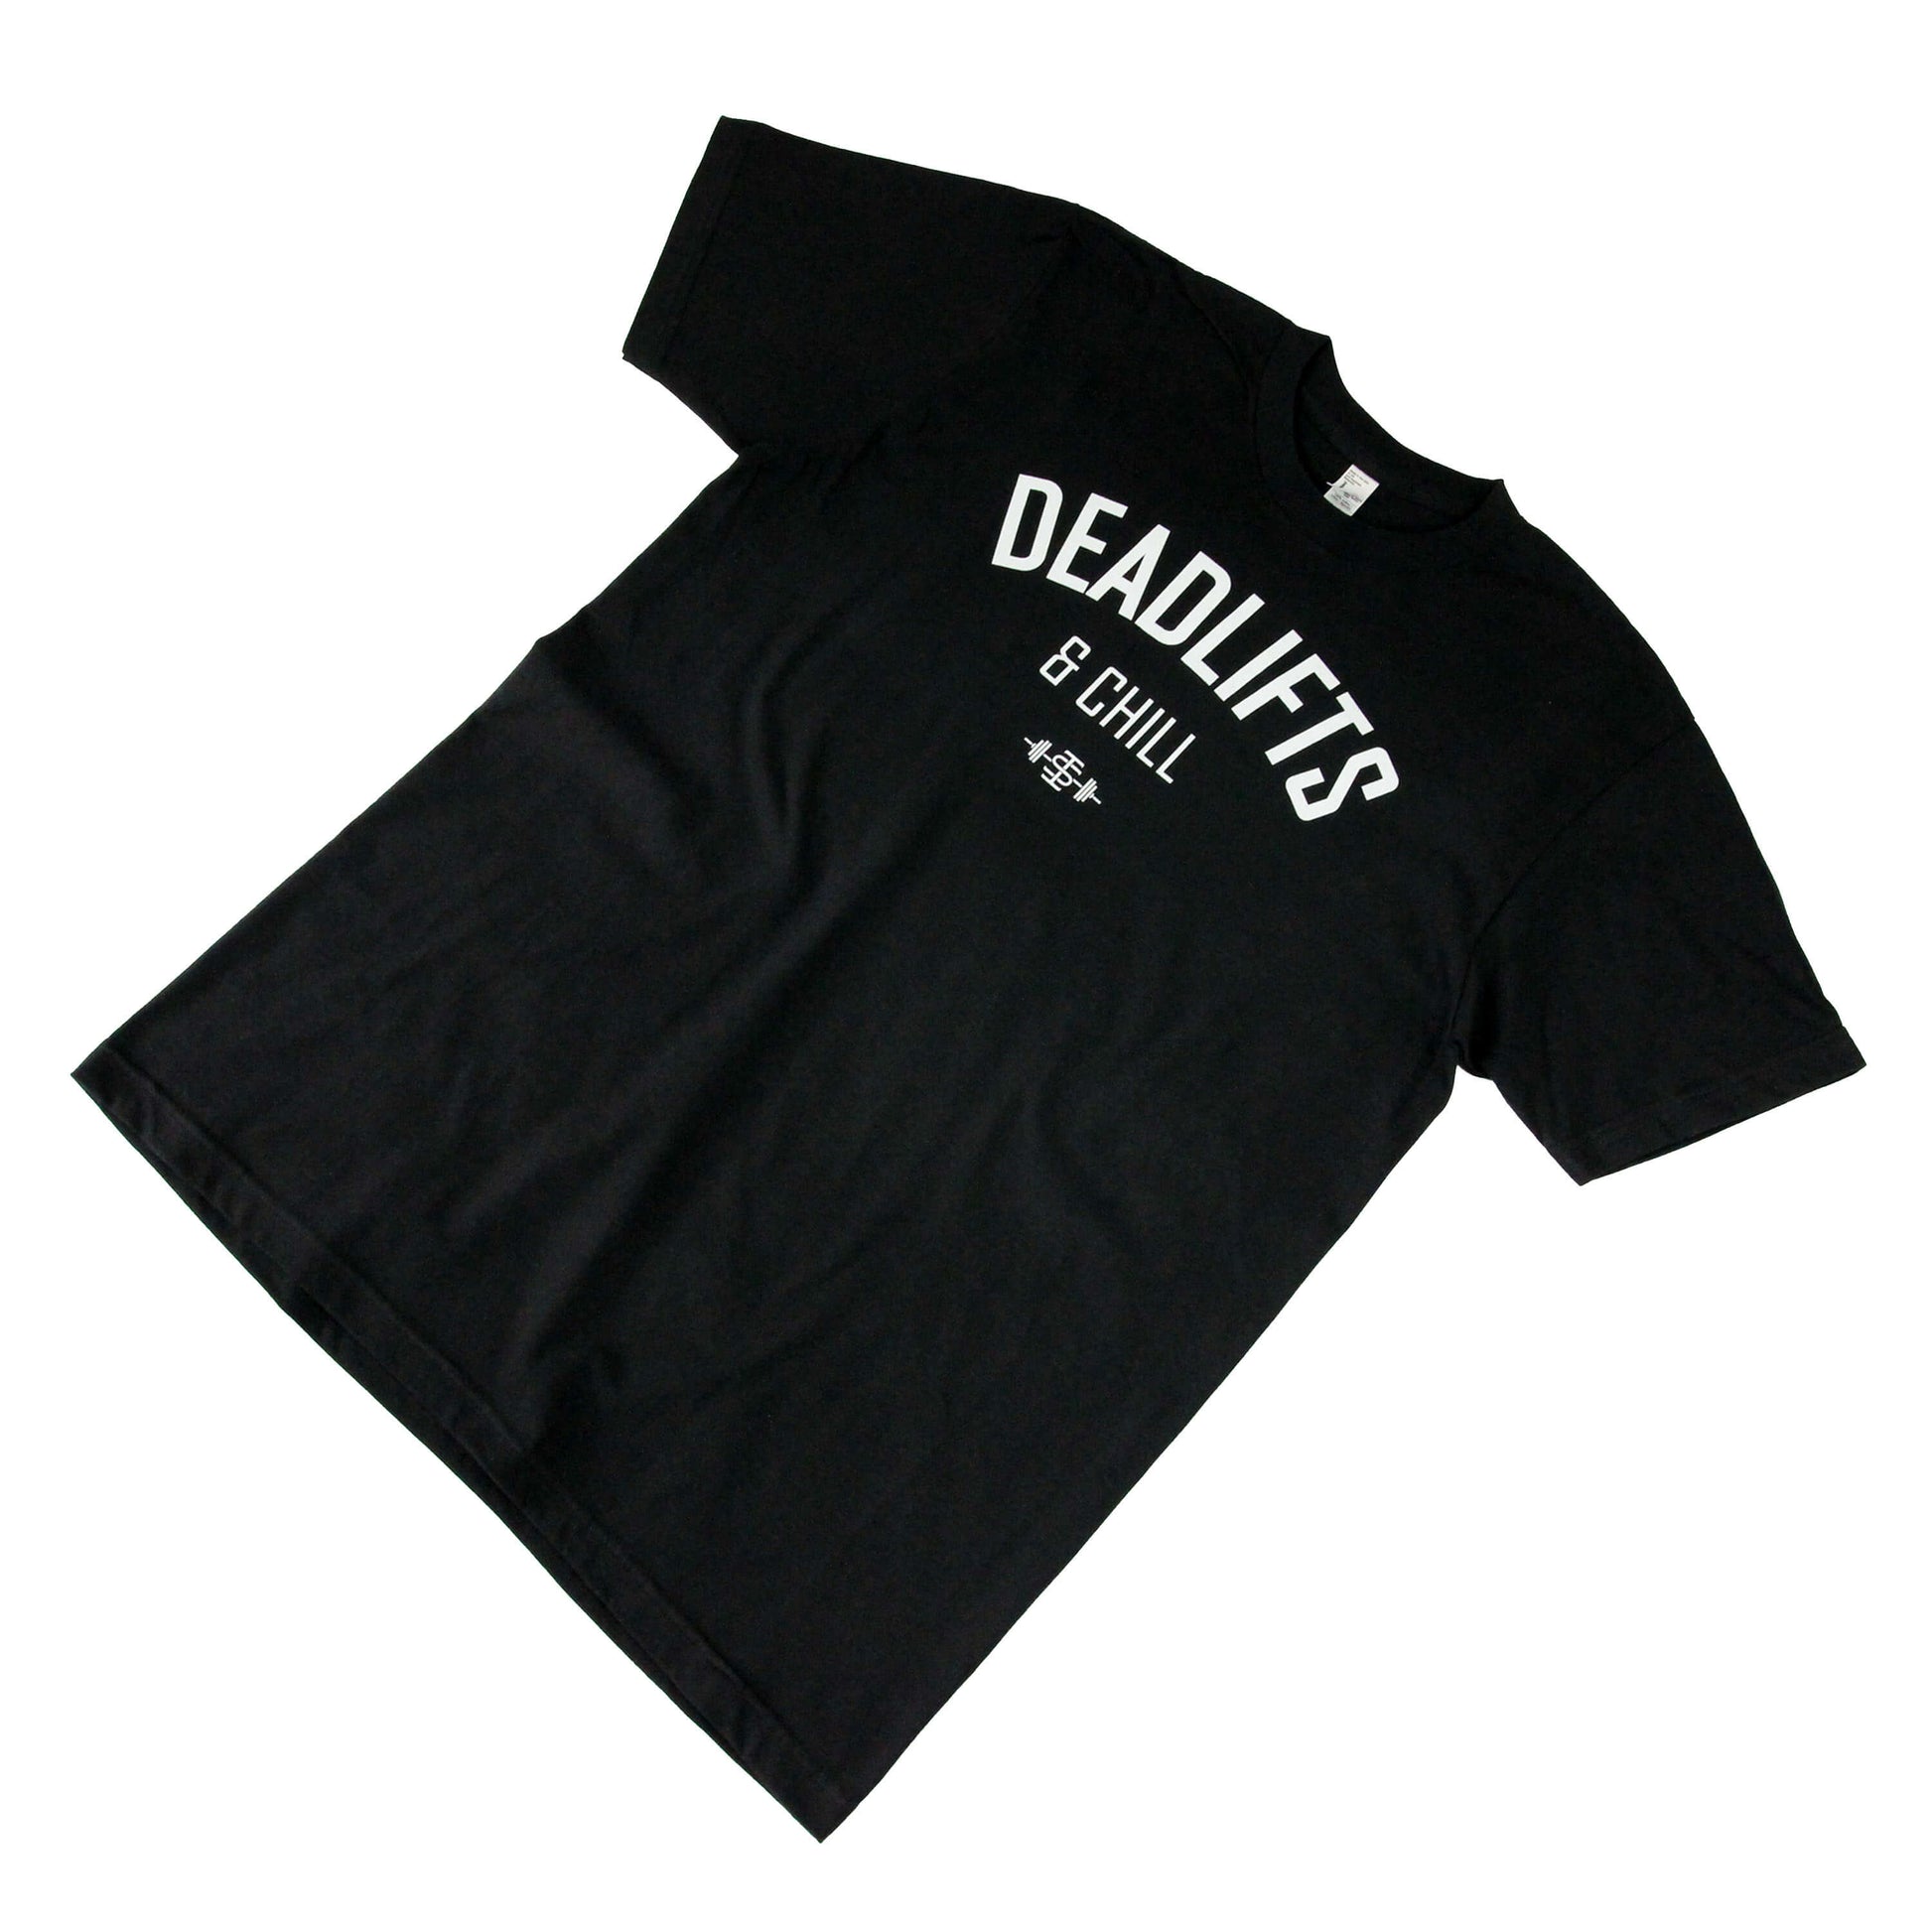 The 'Deadlifts & Chill' Powerlifting t-shirt | Iron Strong Apparel